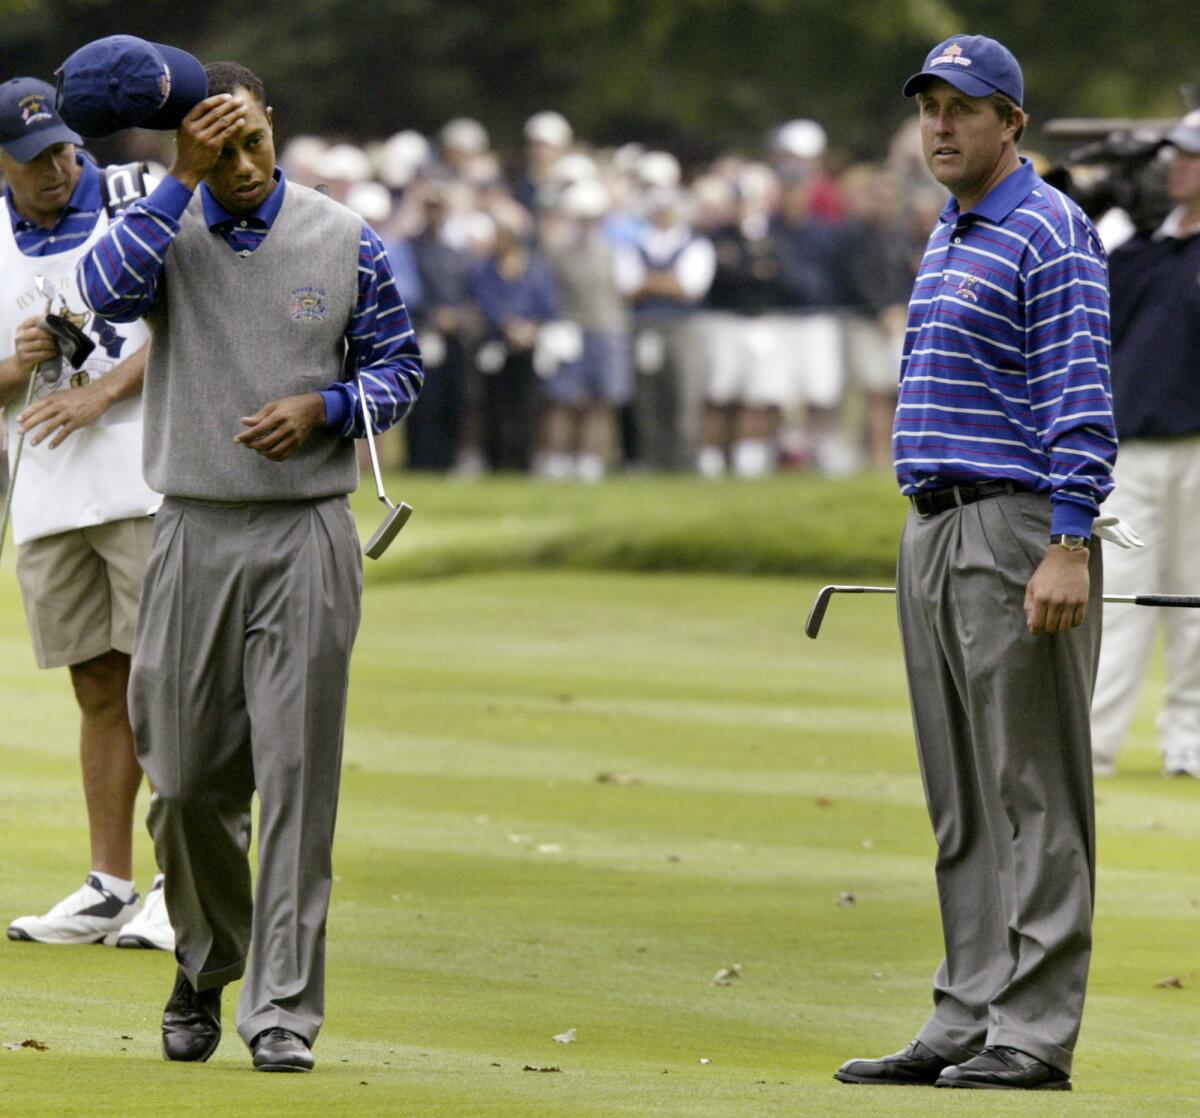 Tiger Woods and Phil Mickelson play in the Ryder Cup competition at Michigan's Oakland Hills Country Club on Sept. 17, 2004.